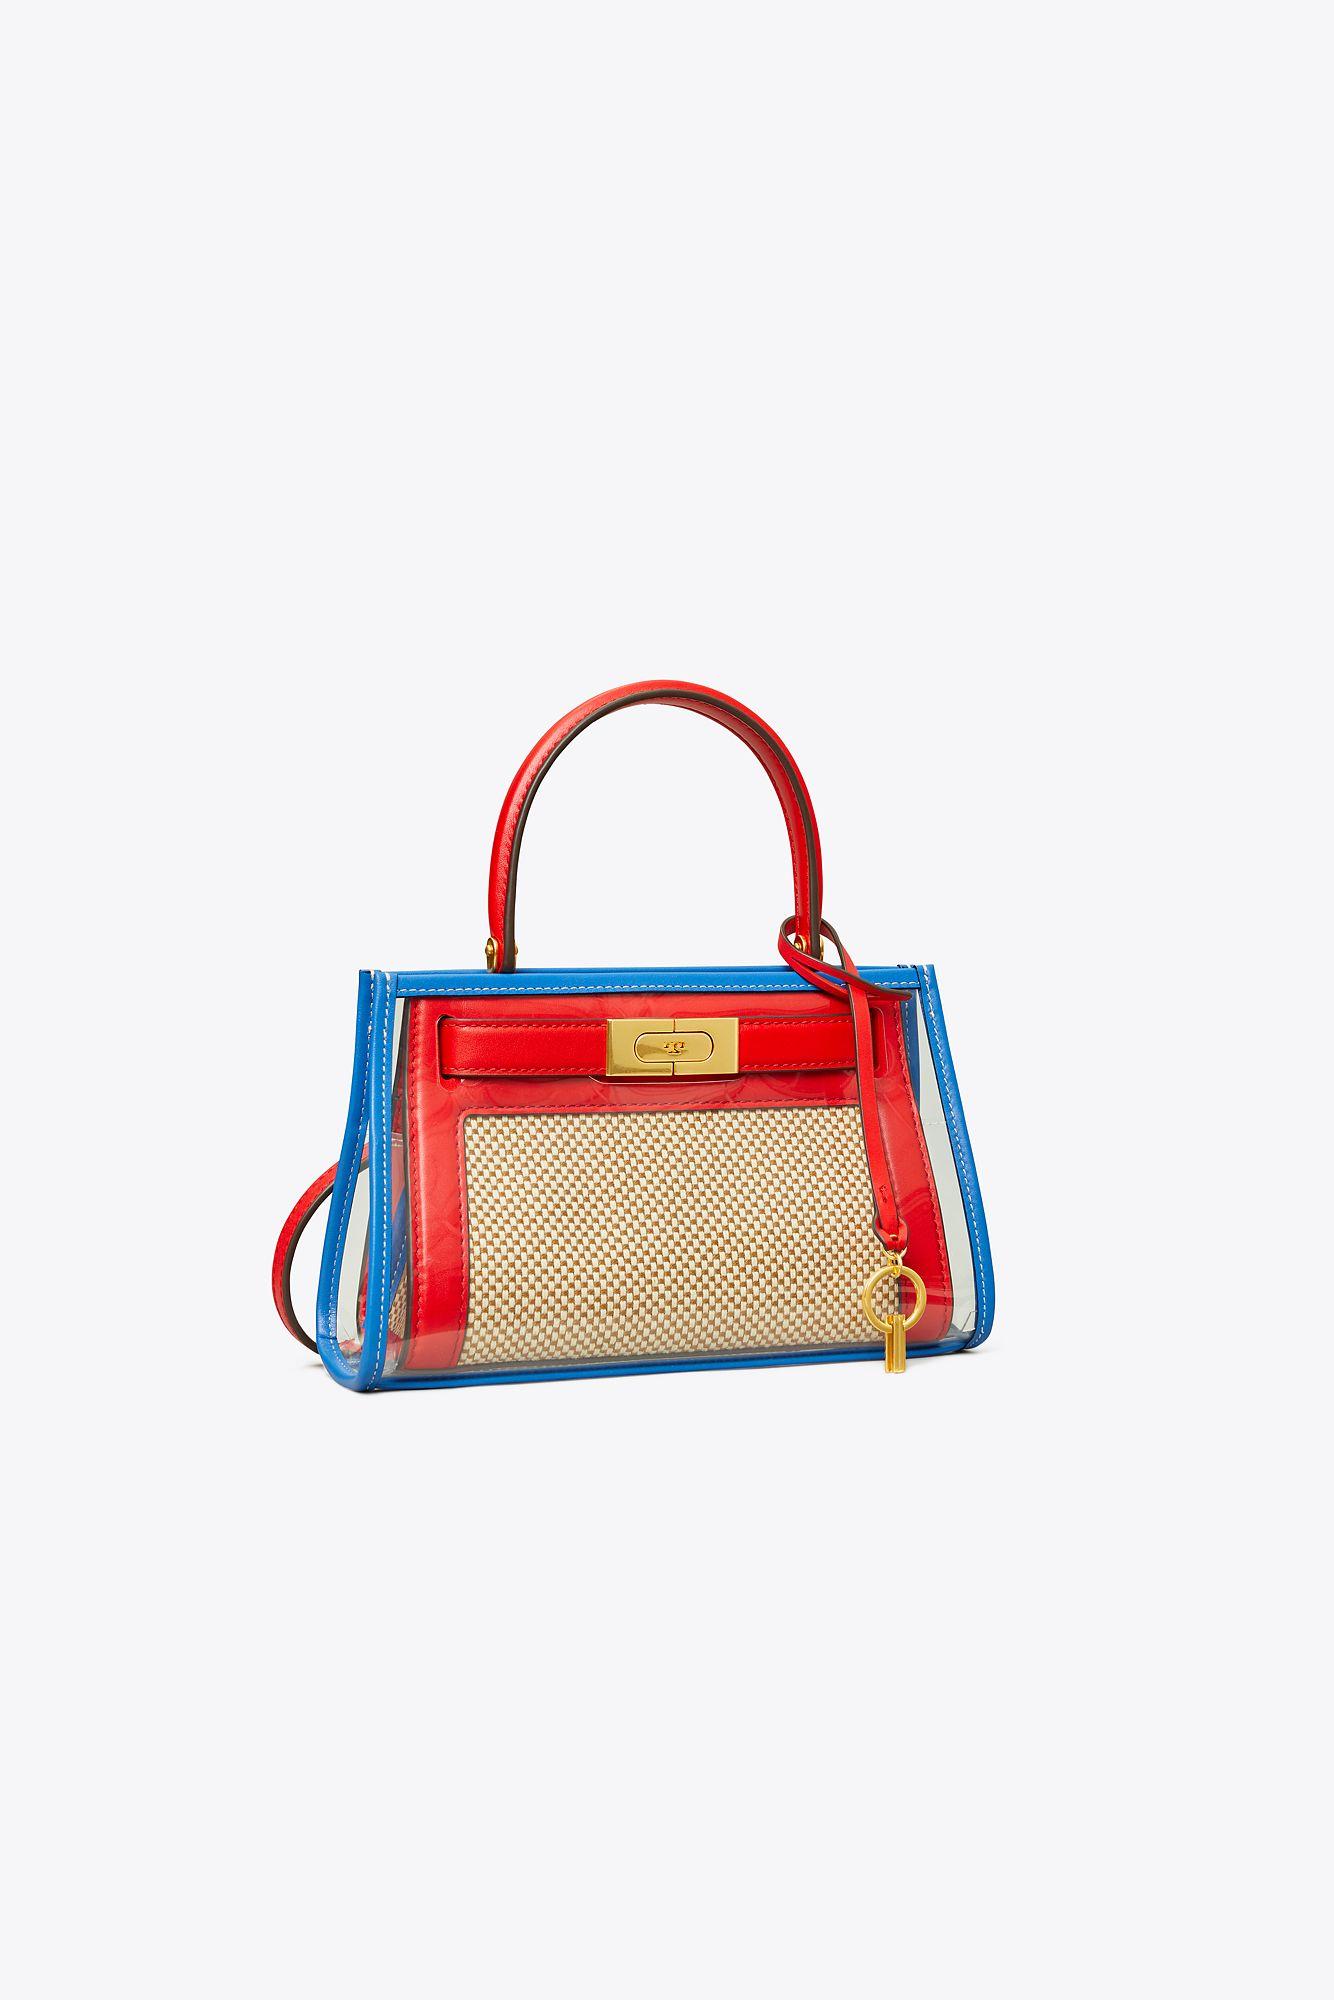 Tory Burch Lee Radziwill Petite Bag With Rain Cover in Red | Lyst